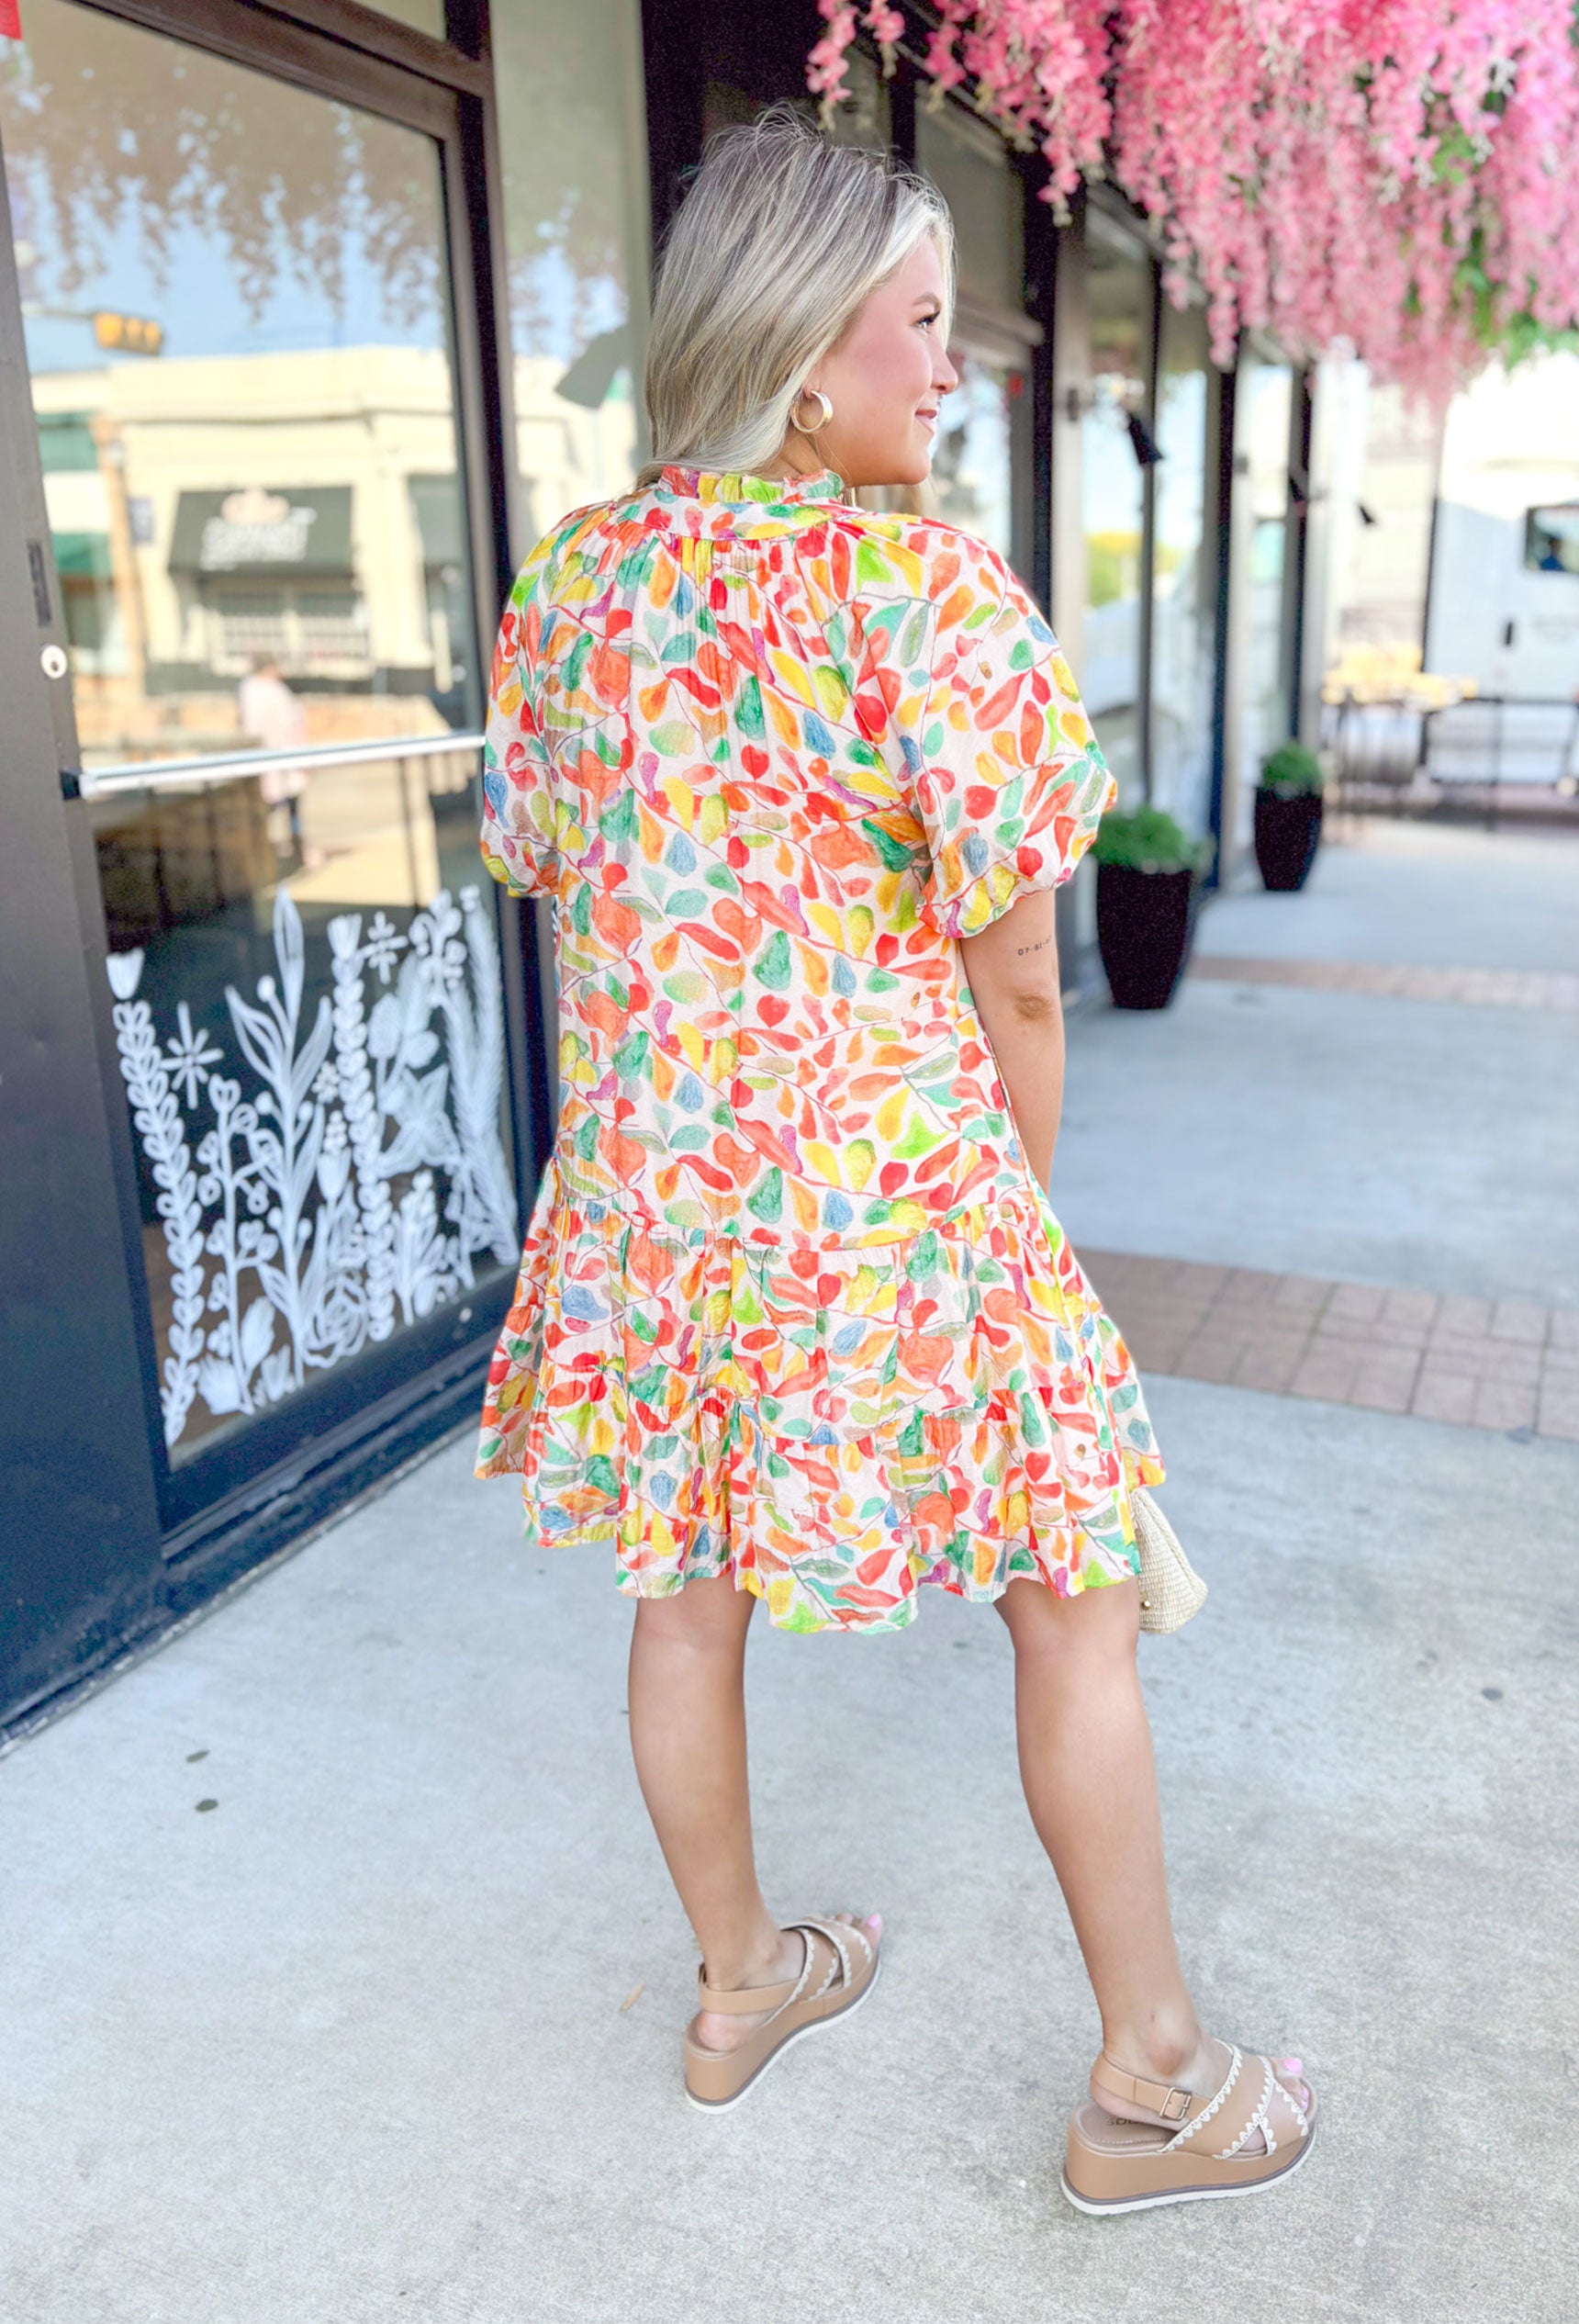 Paradise Awaits Dress, short puff sleeve dress with soft v-neck, ruffling around the neck, string details on the neck, abstract print in the colors cream, orange, yellow, red, and green